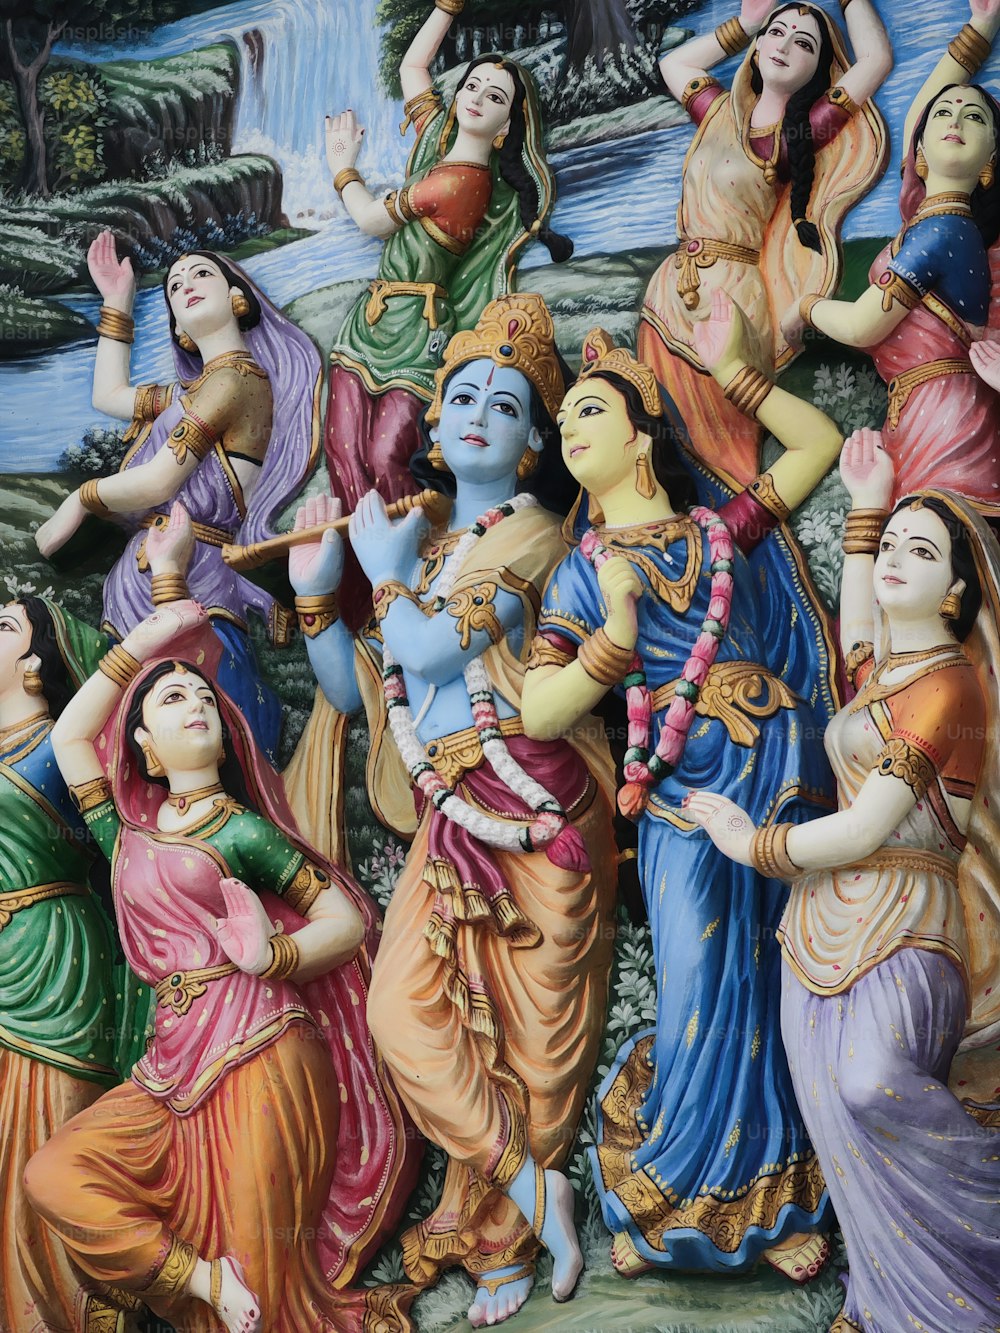 a painting of a group of women dancing